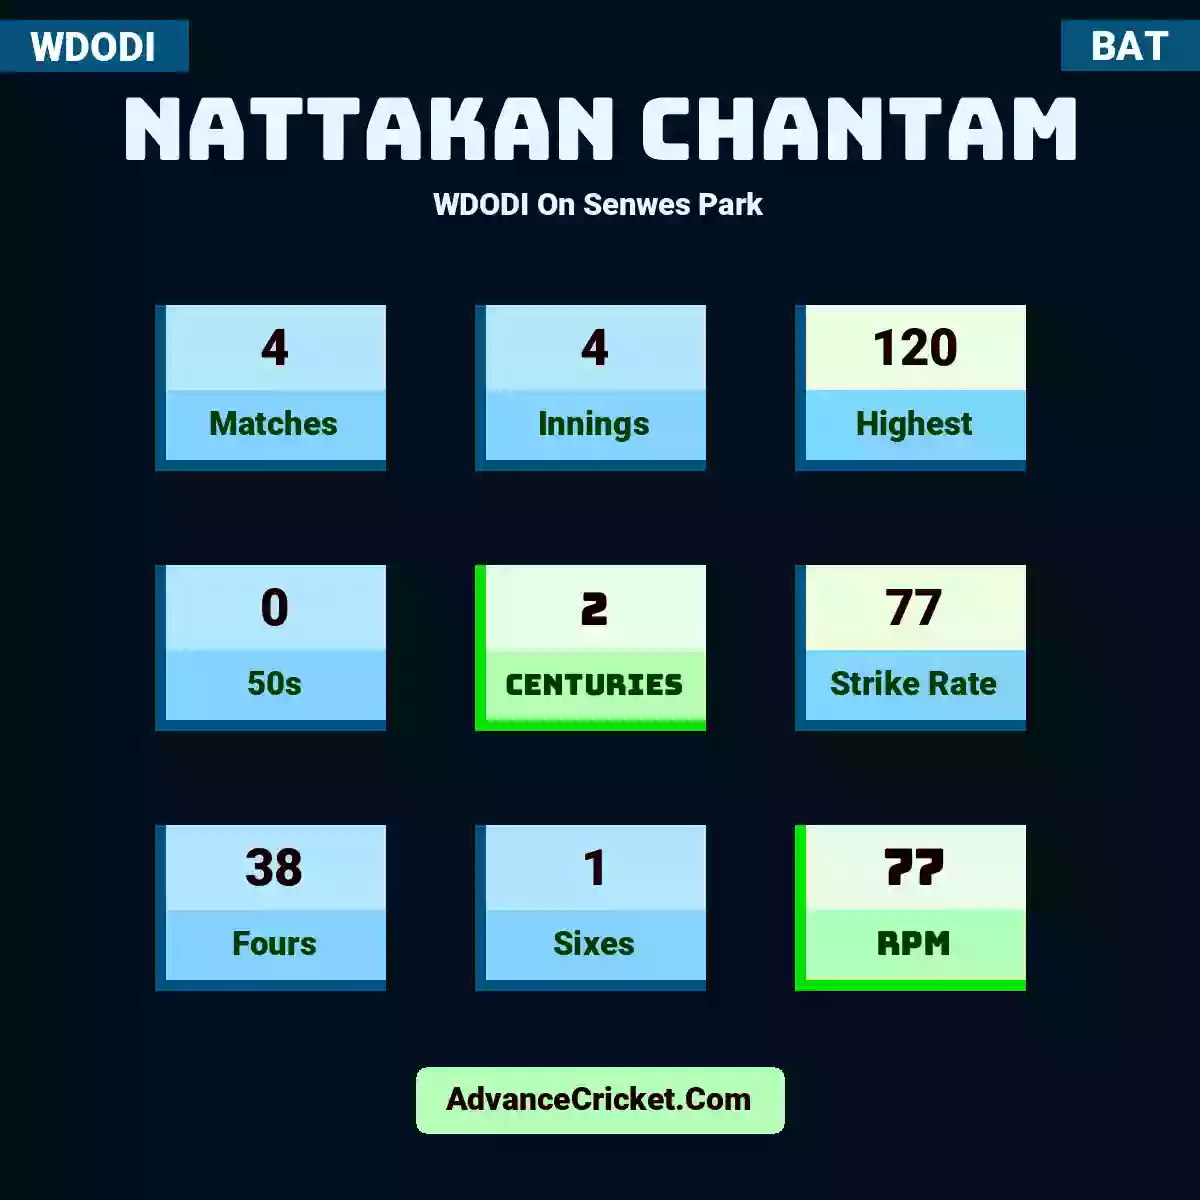 Nattakan Chantam WDODI  On Senwes Park, Nattakan Chantam played 4 matches, scored 120 runs as highest, 0 half-centuries, and 2 centuries, with a strike rate of 77. N.Chantam hit 38 fours and 1 sixes, with an RPM of 77.